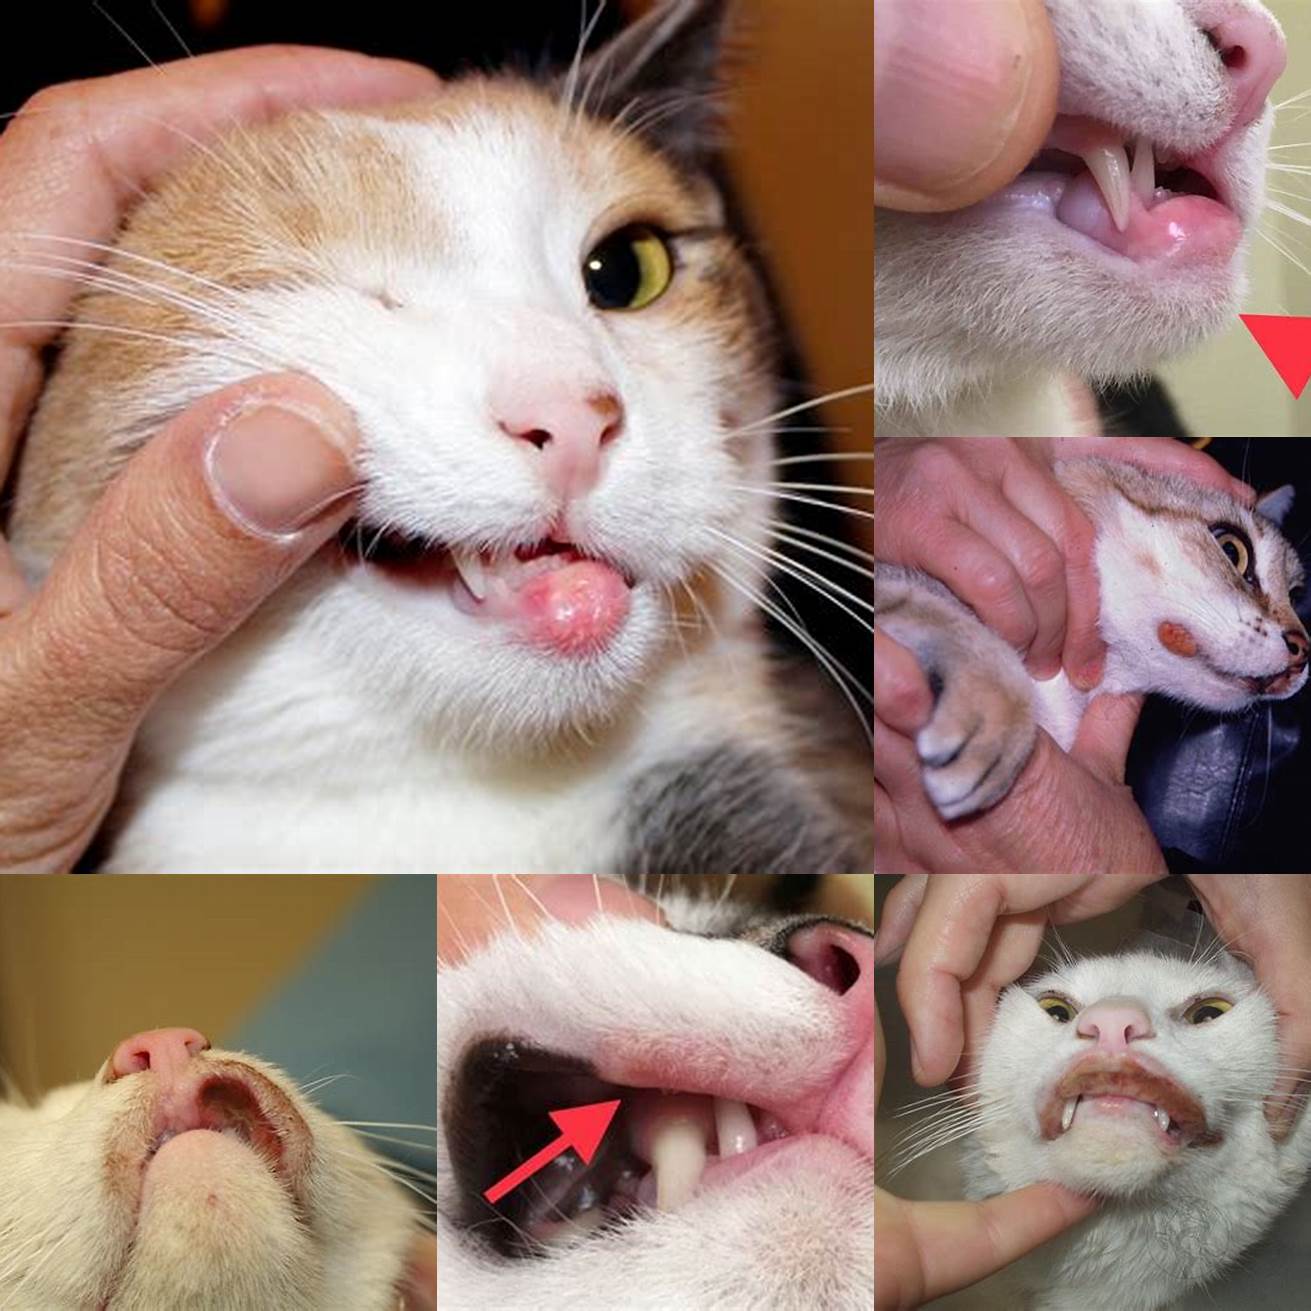 Cat with mouth ulcers